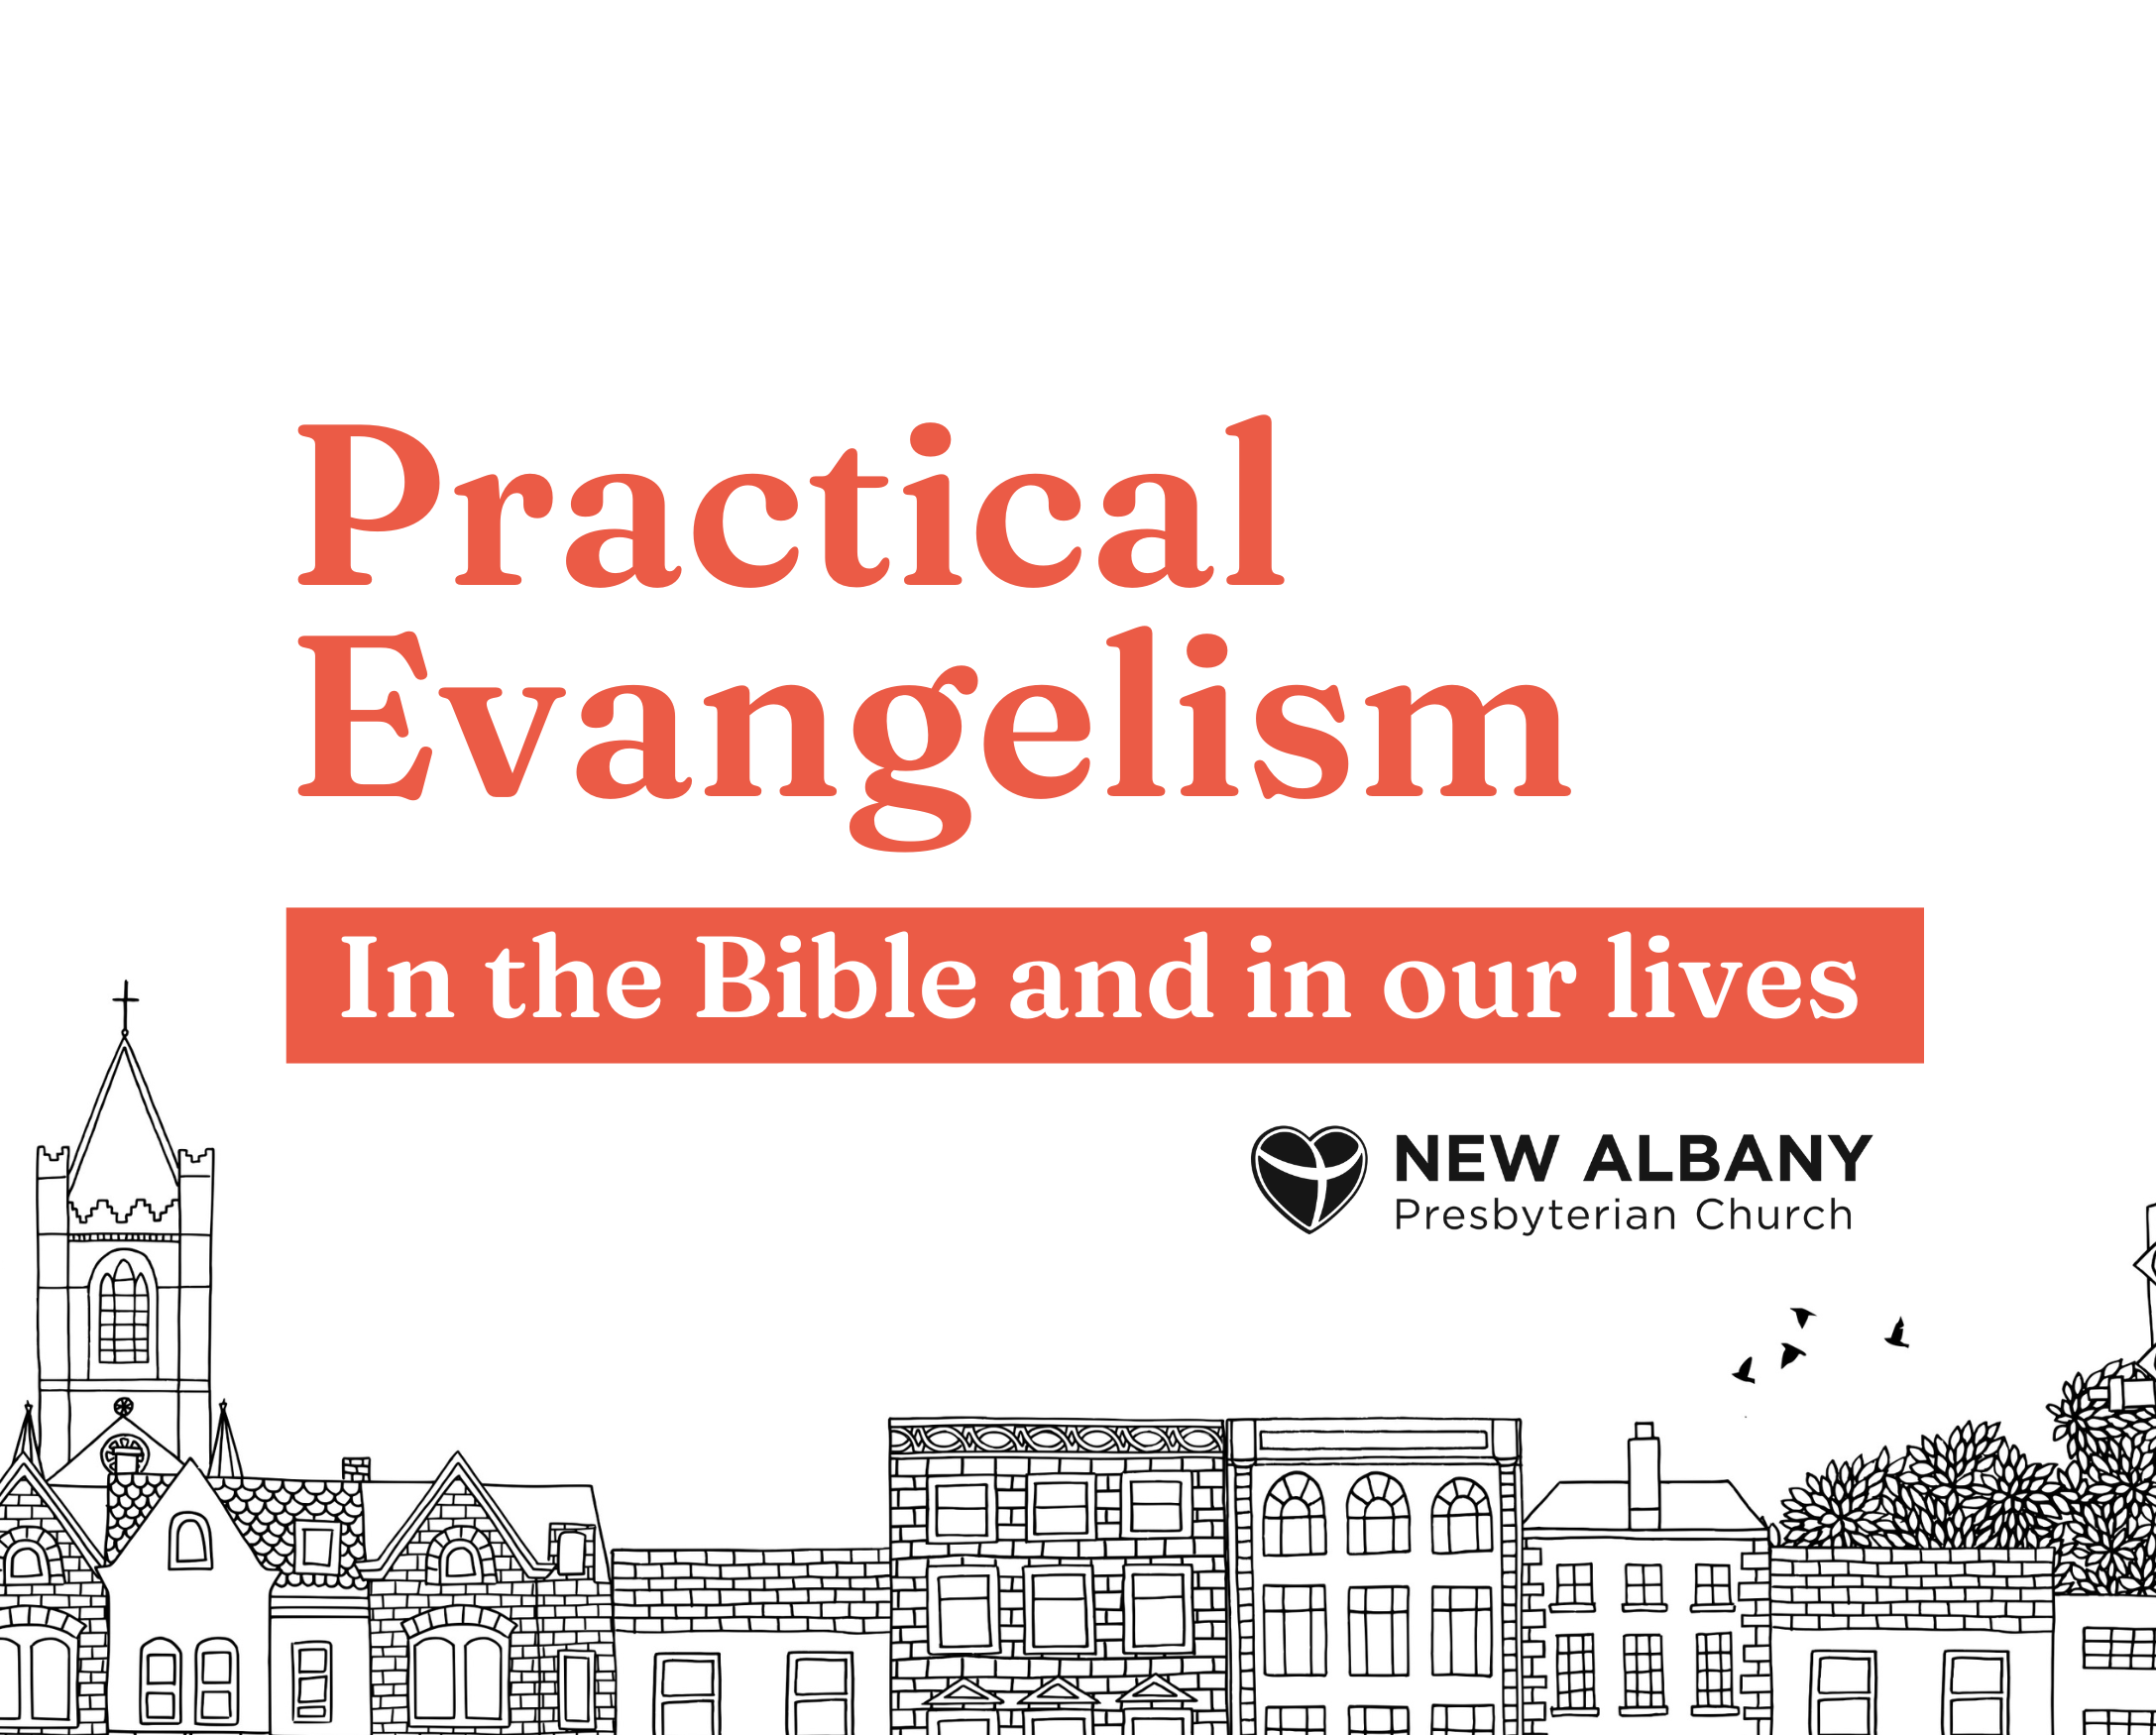 Practical Evangelism in the Bible and our lives: Relationship: Matthew the Tax Collector